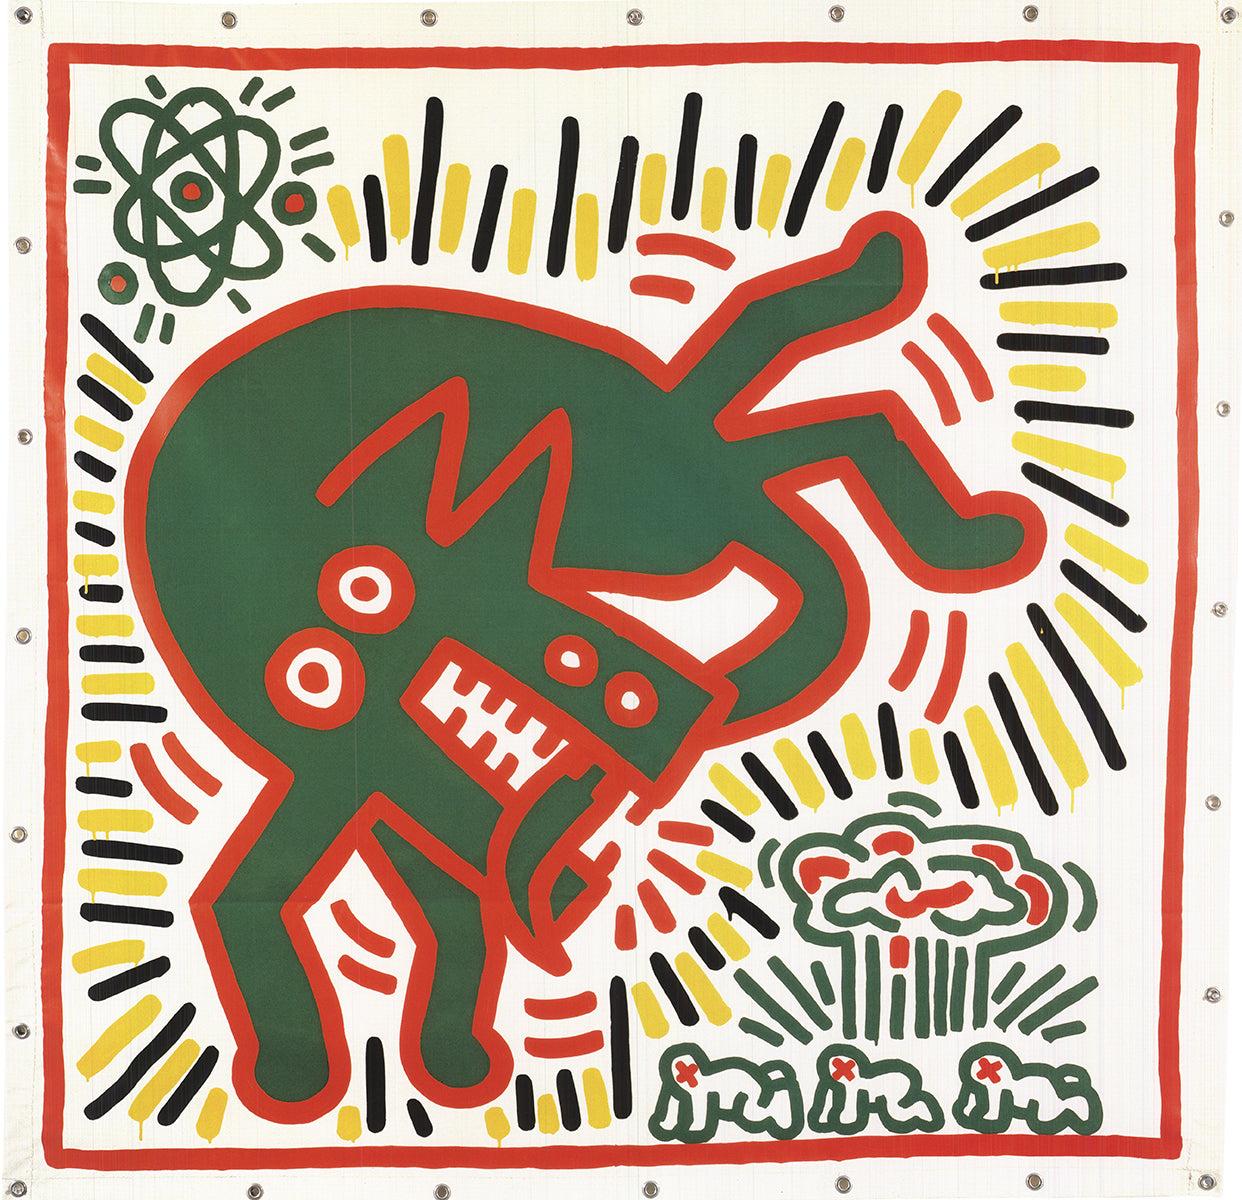 Keith Haring 'Untitled, 1983' 2008- Lithographie offset en vente 1